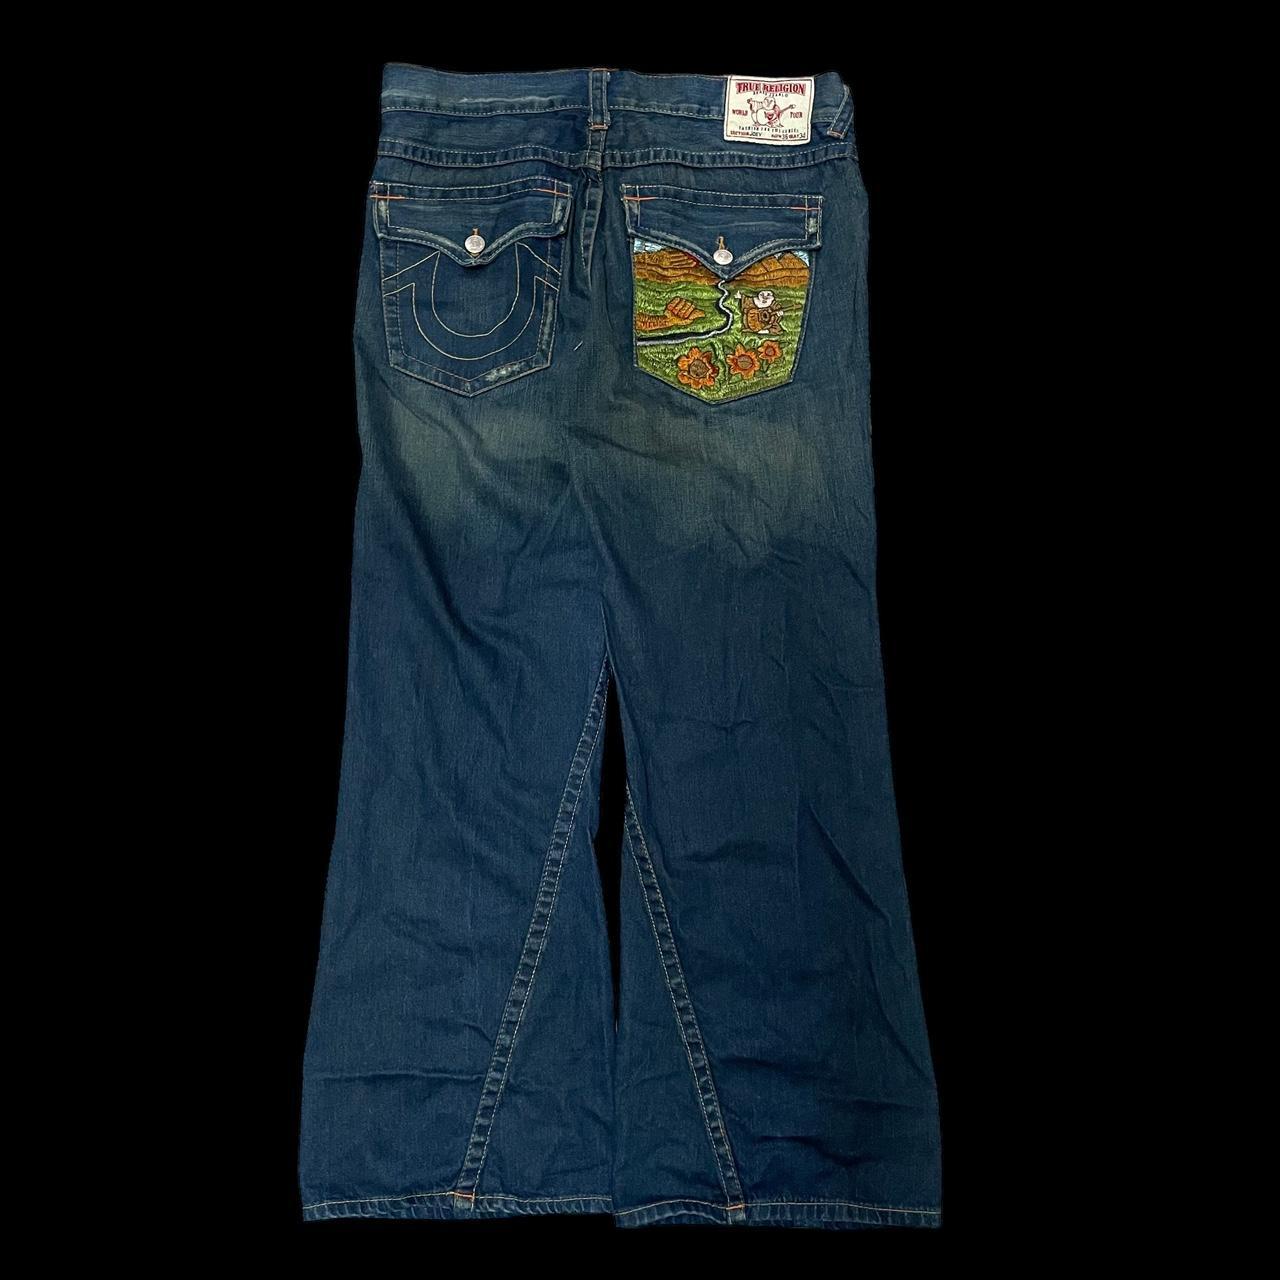 Crazy Buddha Embroidered True Religions Jeans With Depop